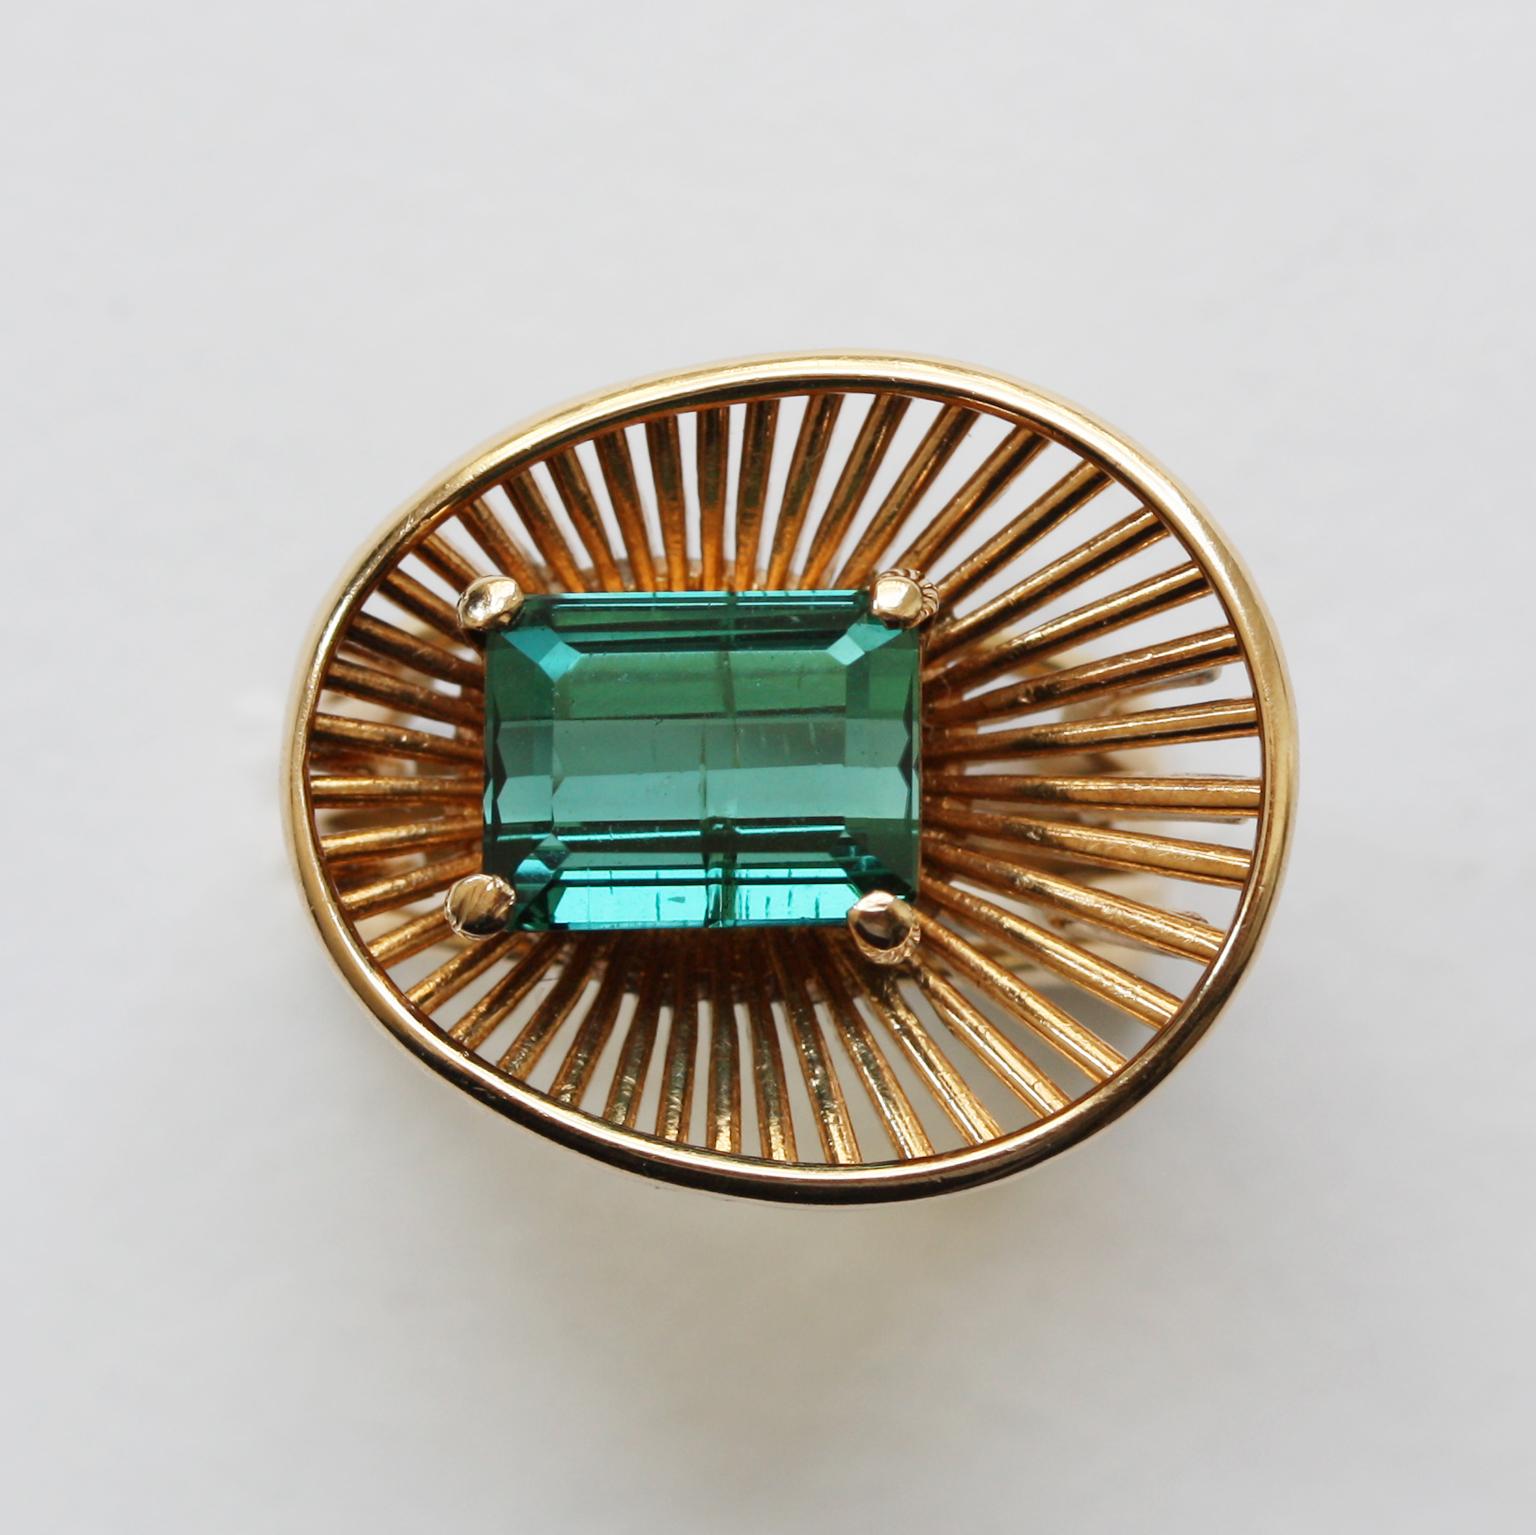 An asymmetrical 14 carat gold ring with wire work in the style of Archibald Dumbar set with a green emerald cut tourmaline, The Netherlands, circa 1950.

ring size: 15.5 - 15.75 mm / 5 US
weight: 6.03 gram
dimensions tourmaline: 9 x 7 mm